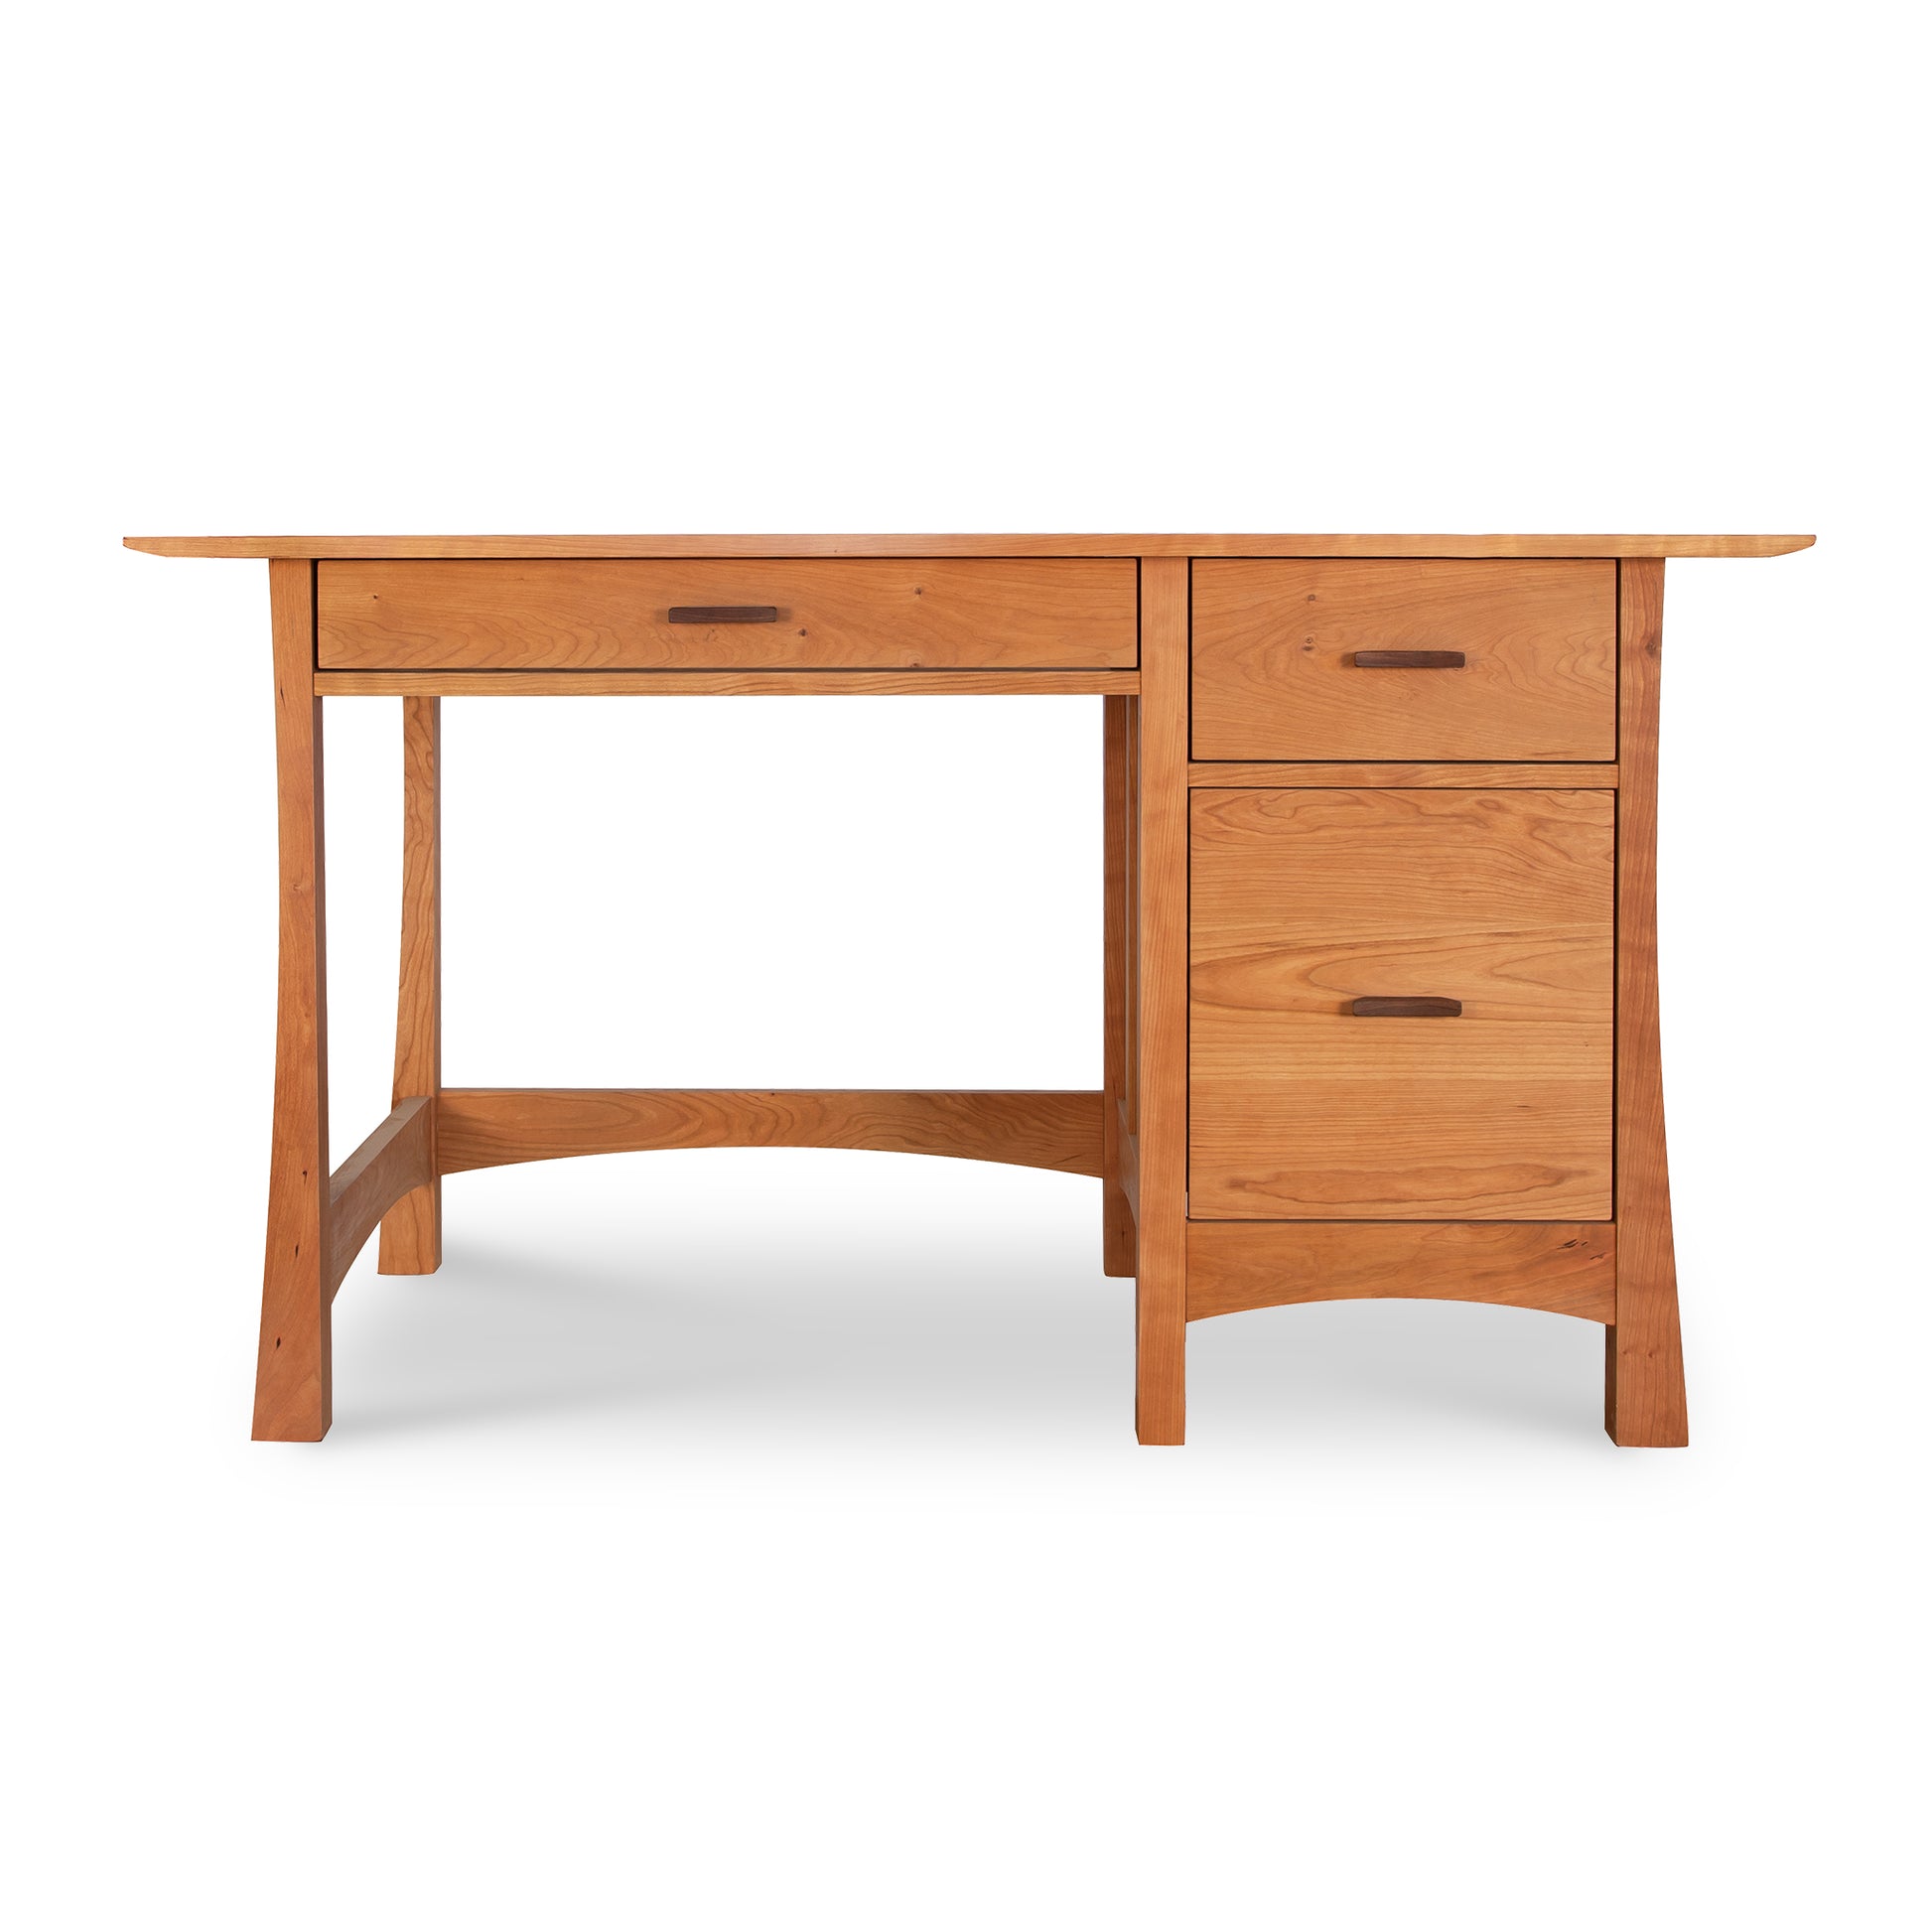 A Vermont Furniture Designs Contemporary Craftsman Study Desk made of solid wood, featuring a drawer and two additional drawers.